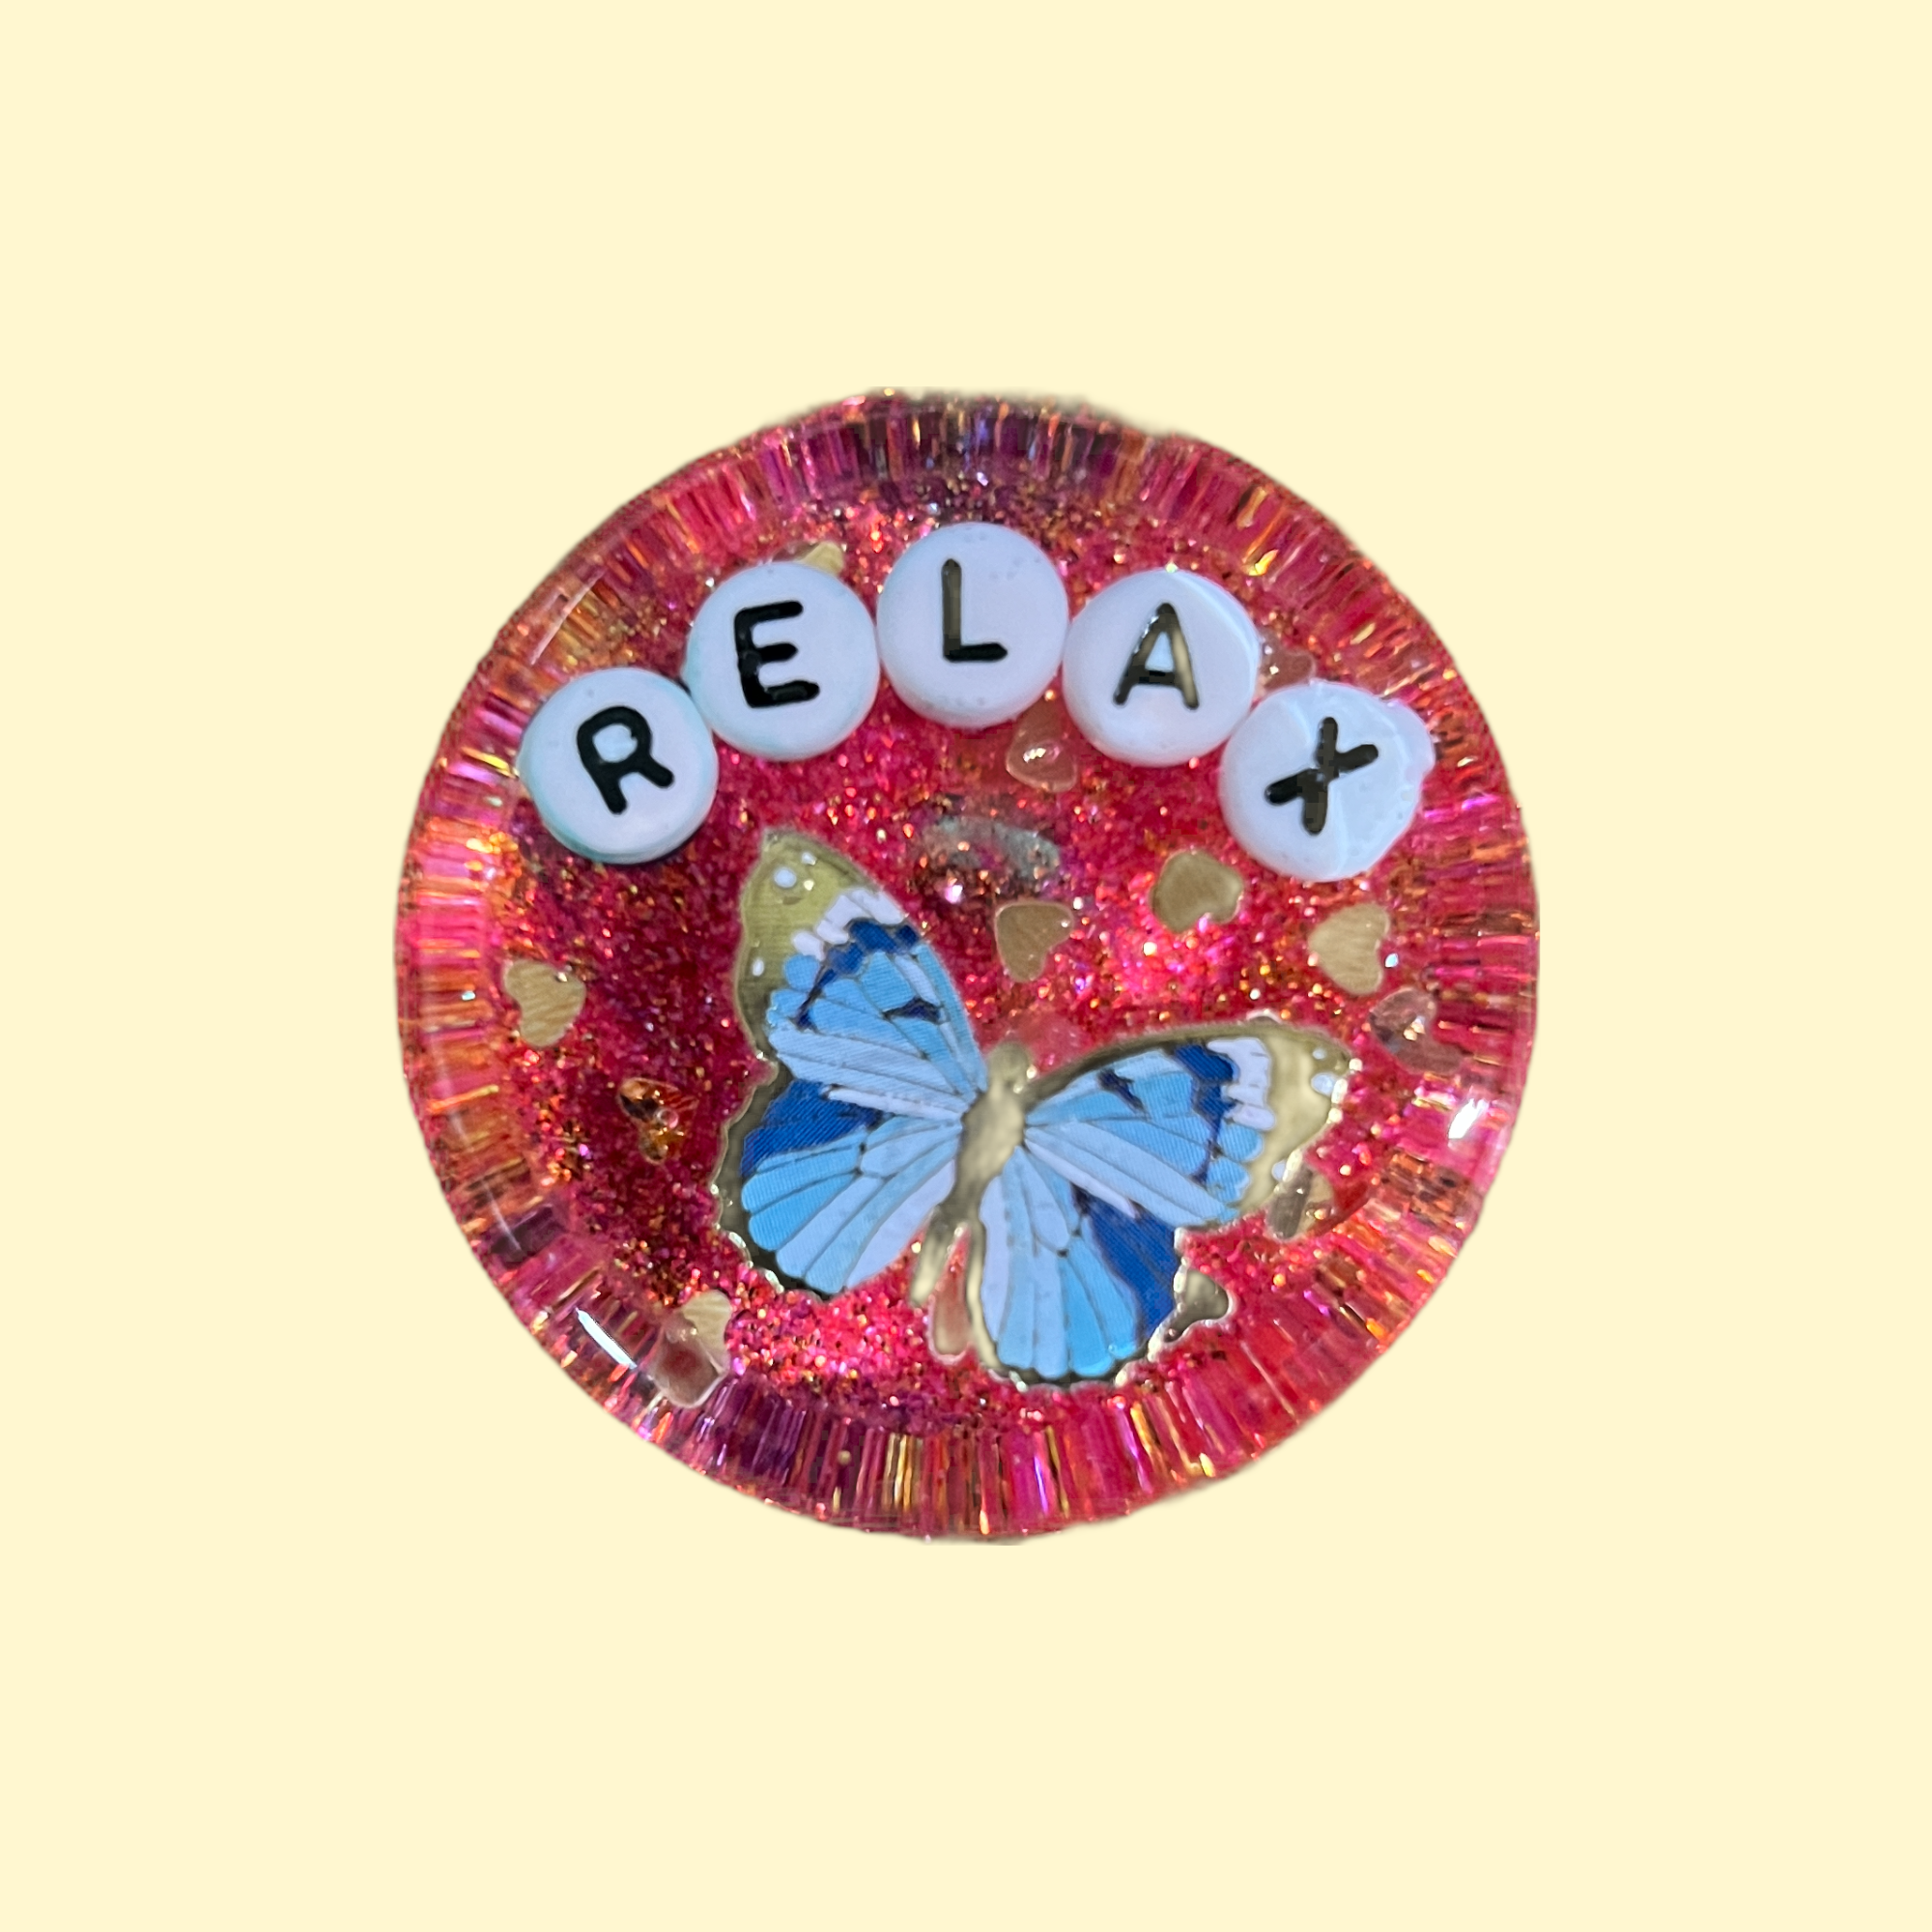 Relax - Shower Art - READY TO SHIP